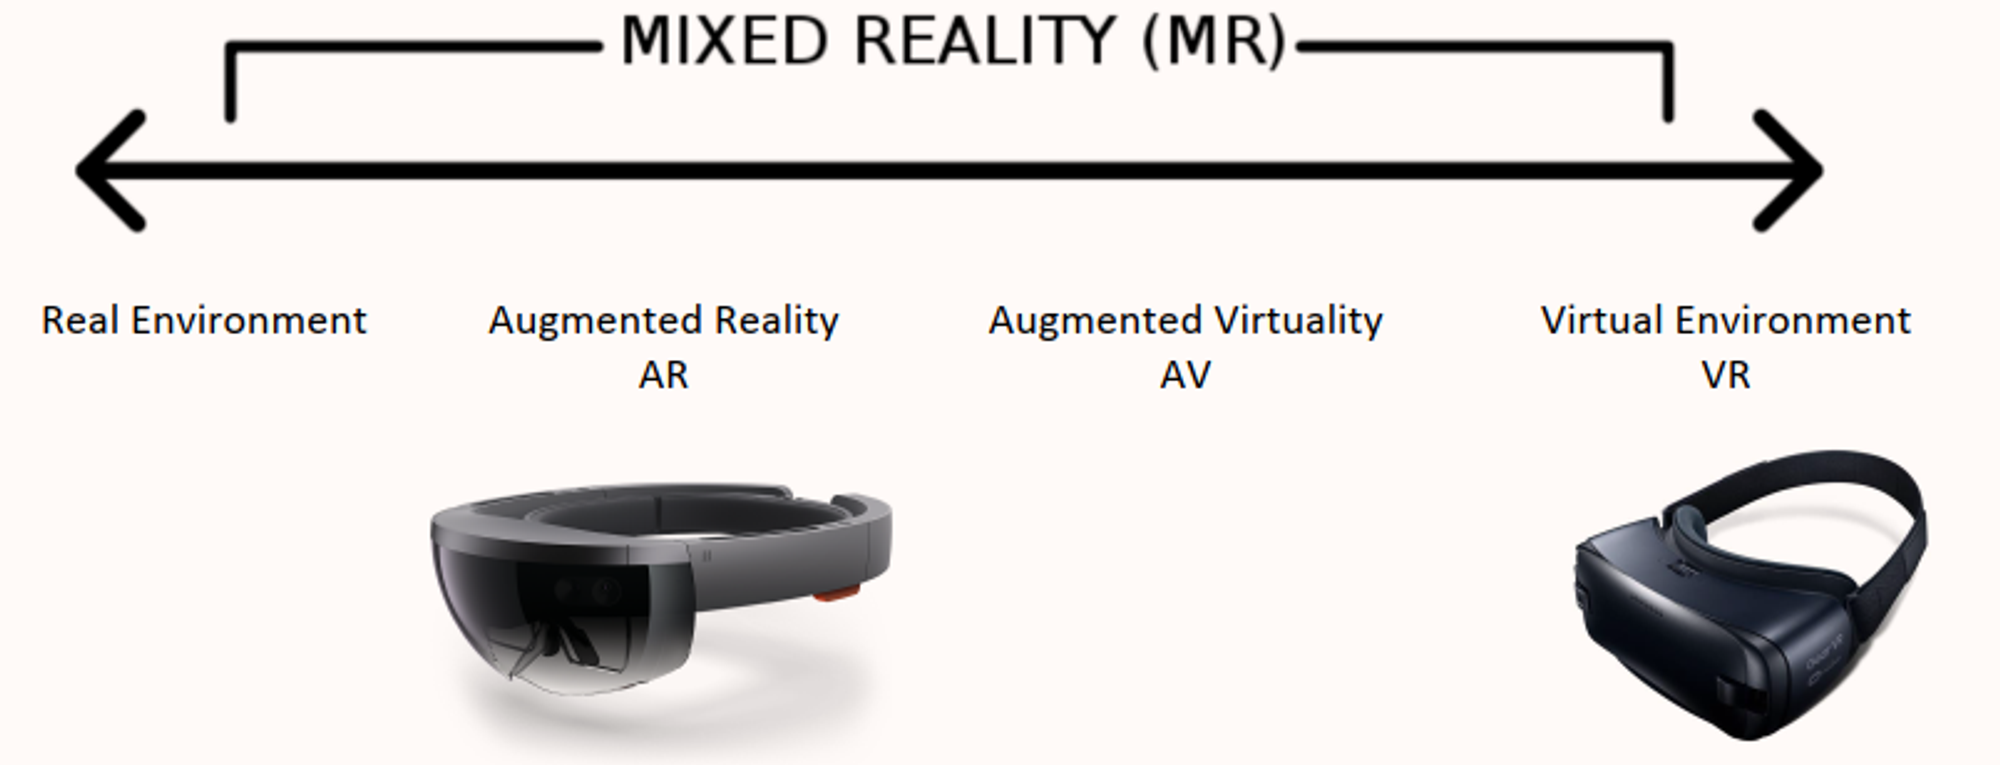 Mixed reality continuum: real world, AR, VR